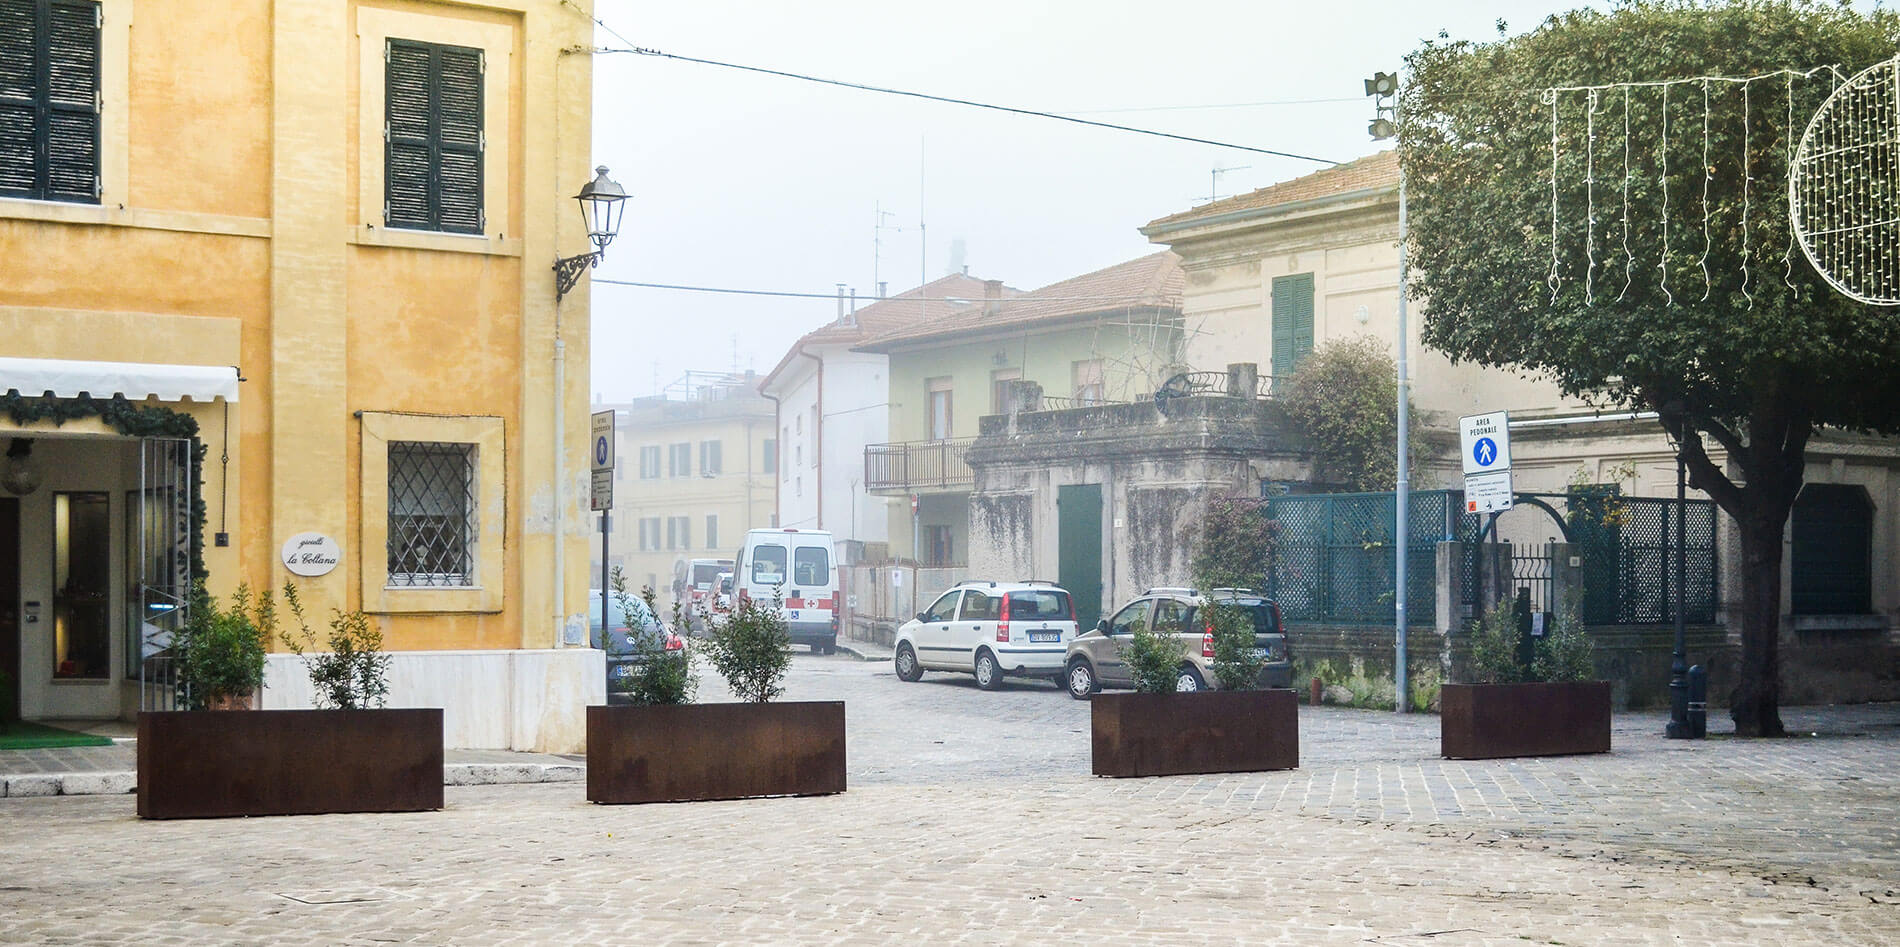 Anti-terrorism barriers to protect Senigallia's Square